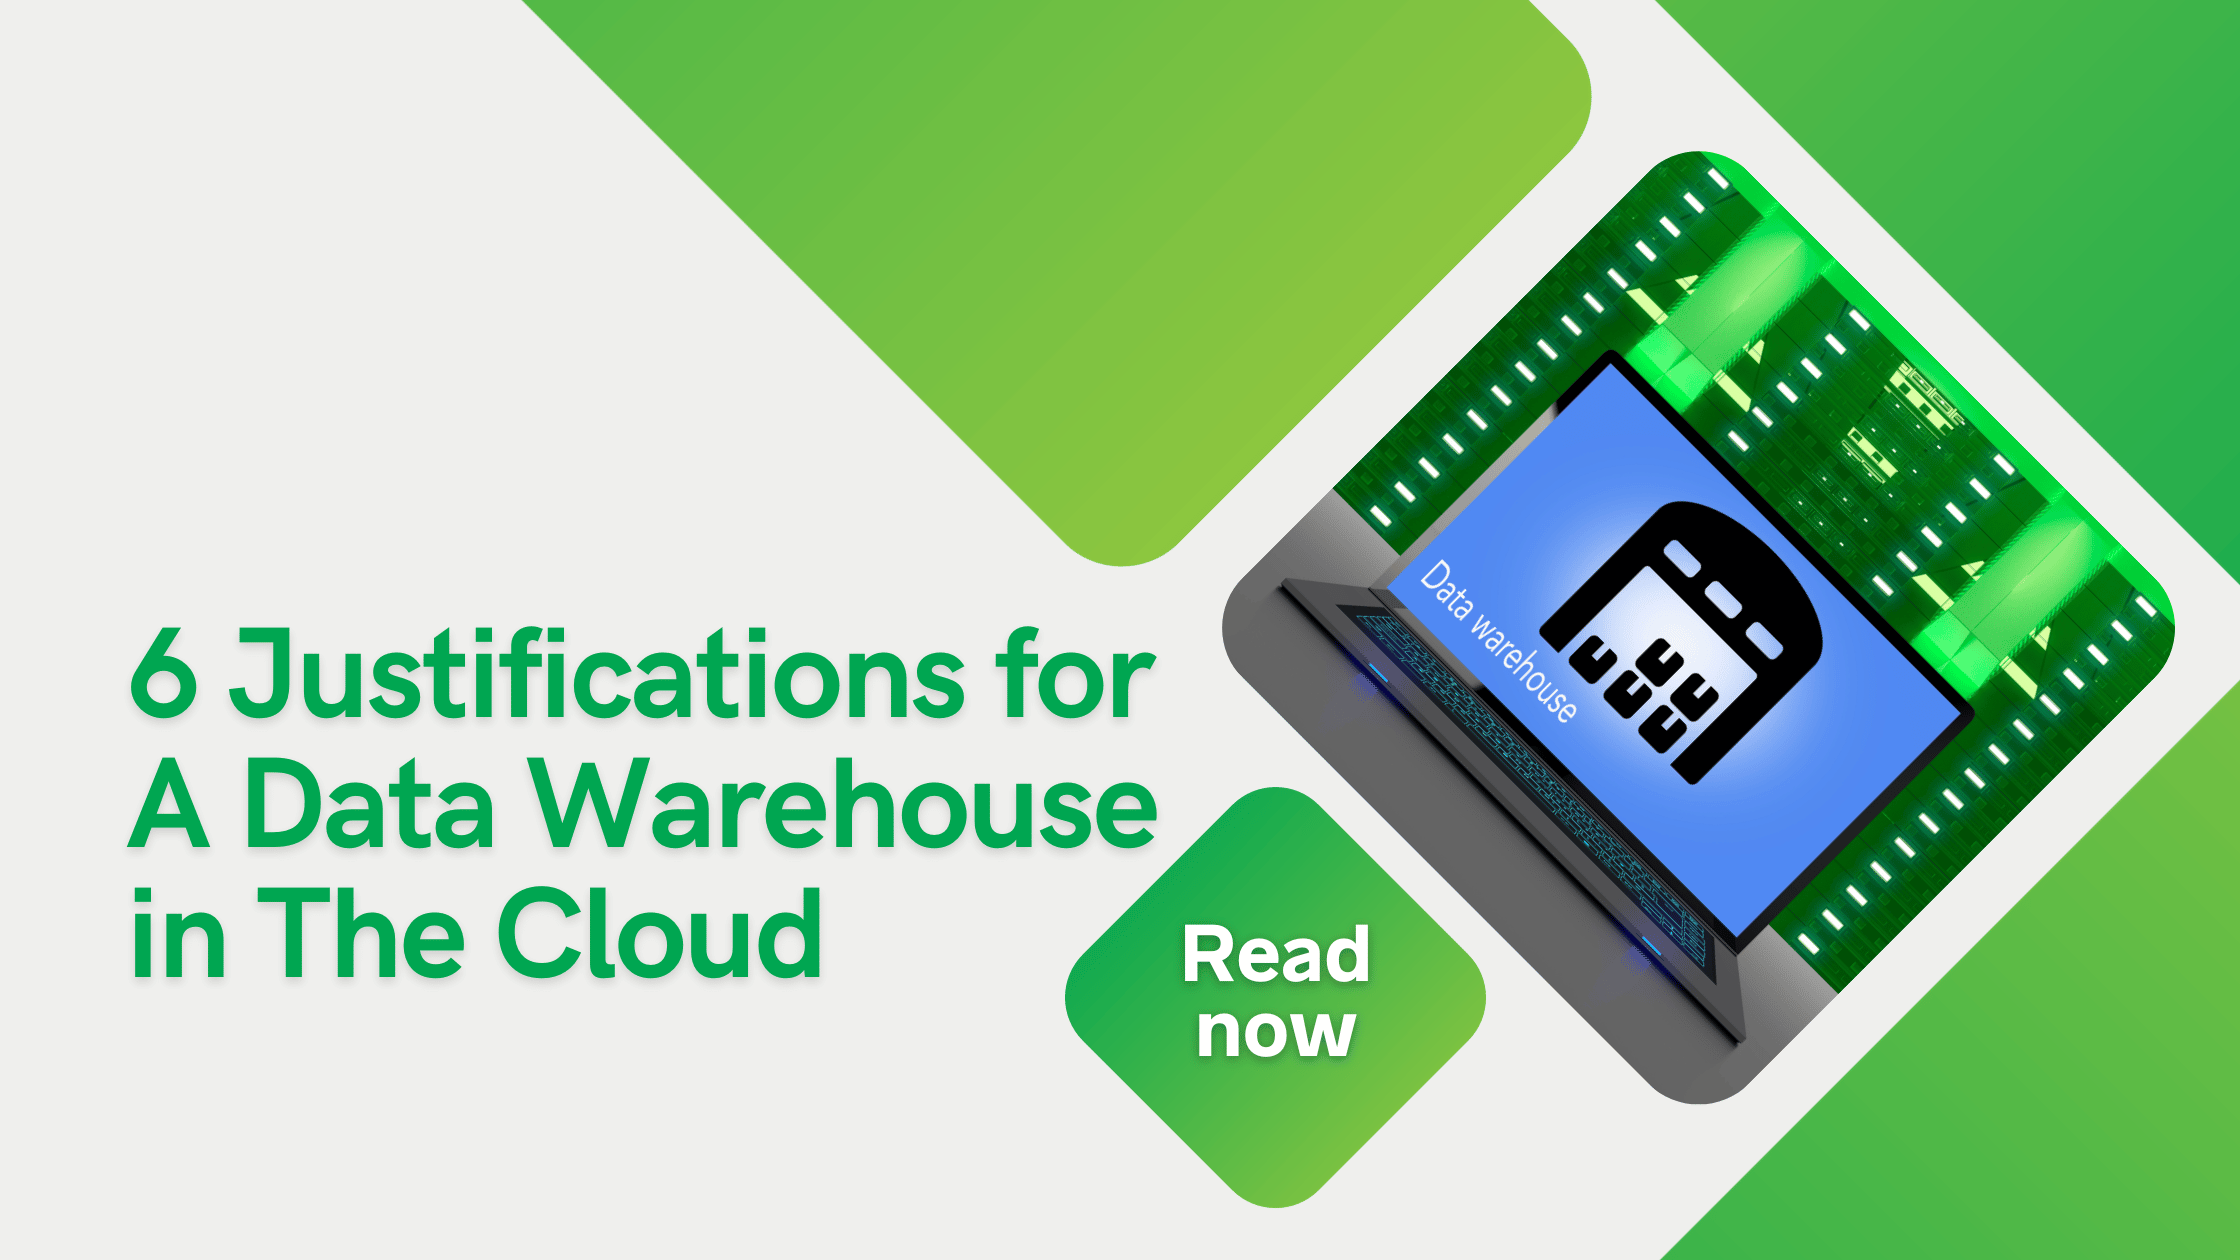 6 Justifications for A Data Warehouse in The Cloud